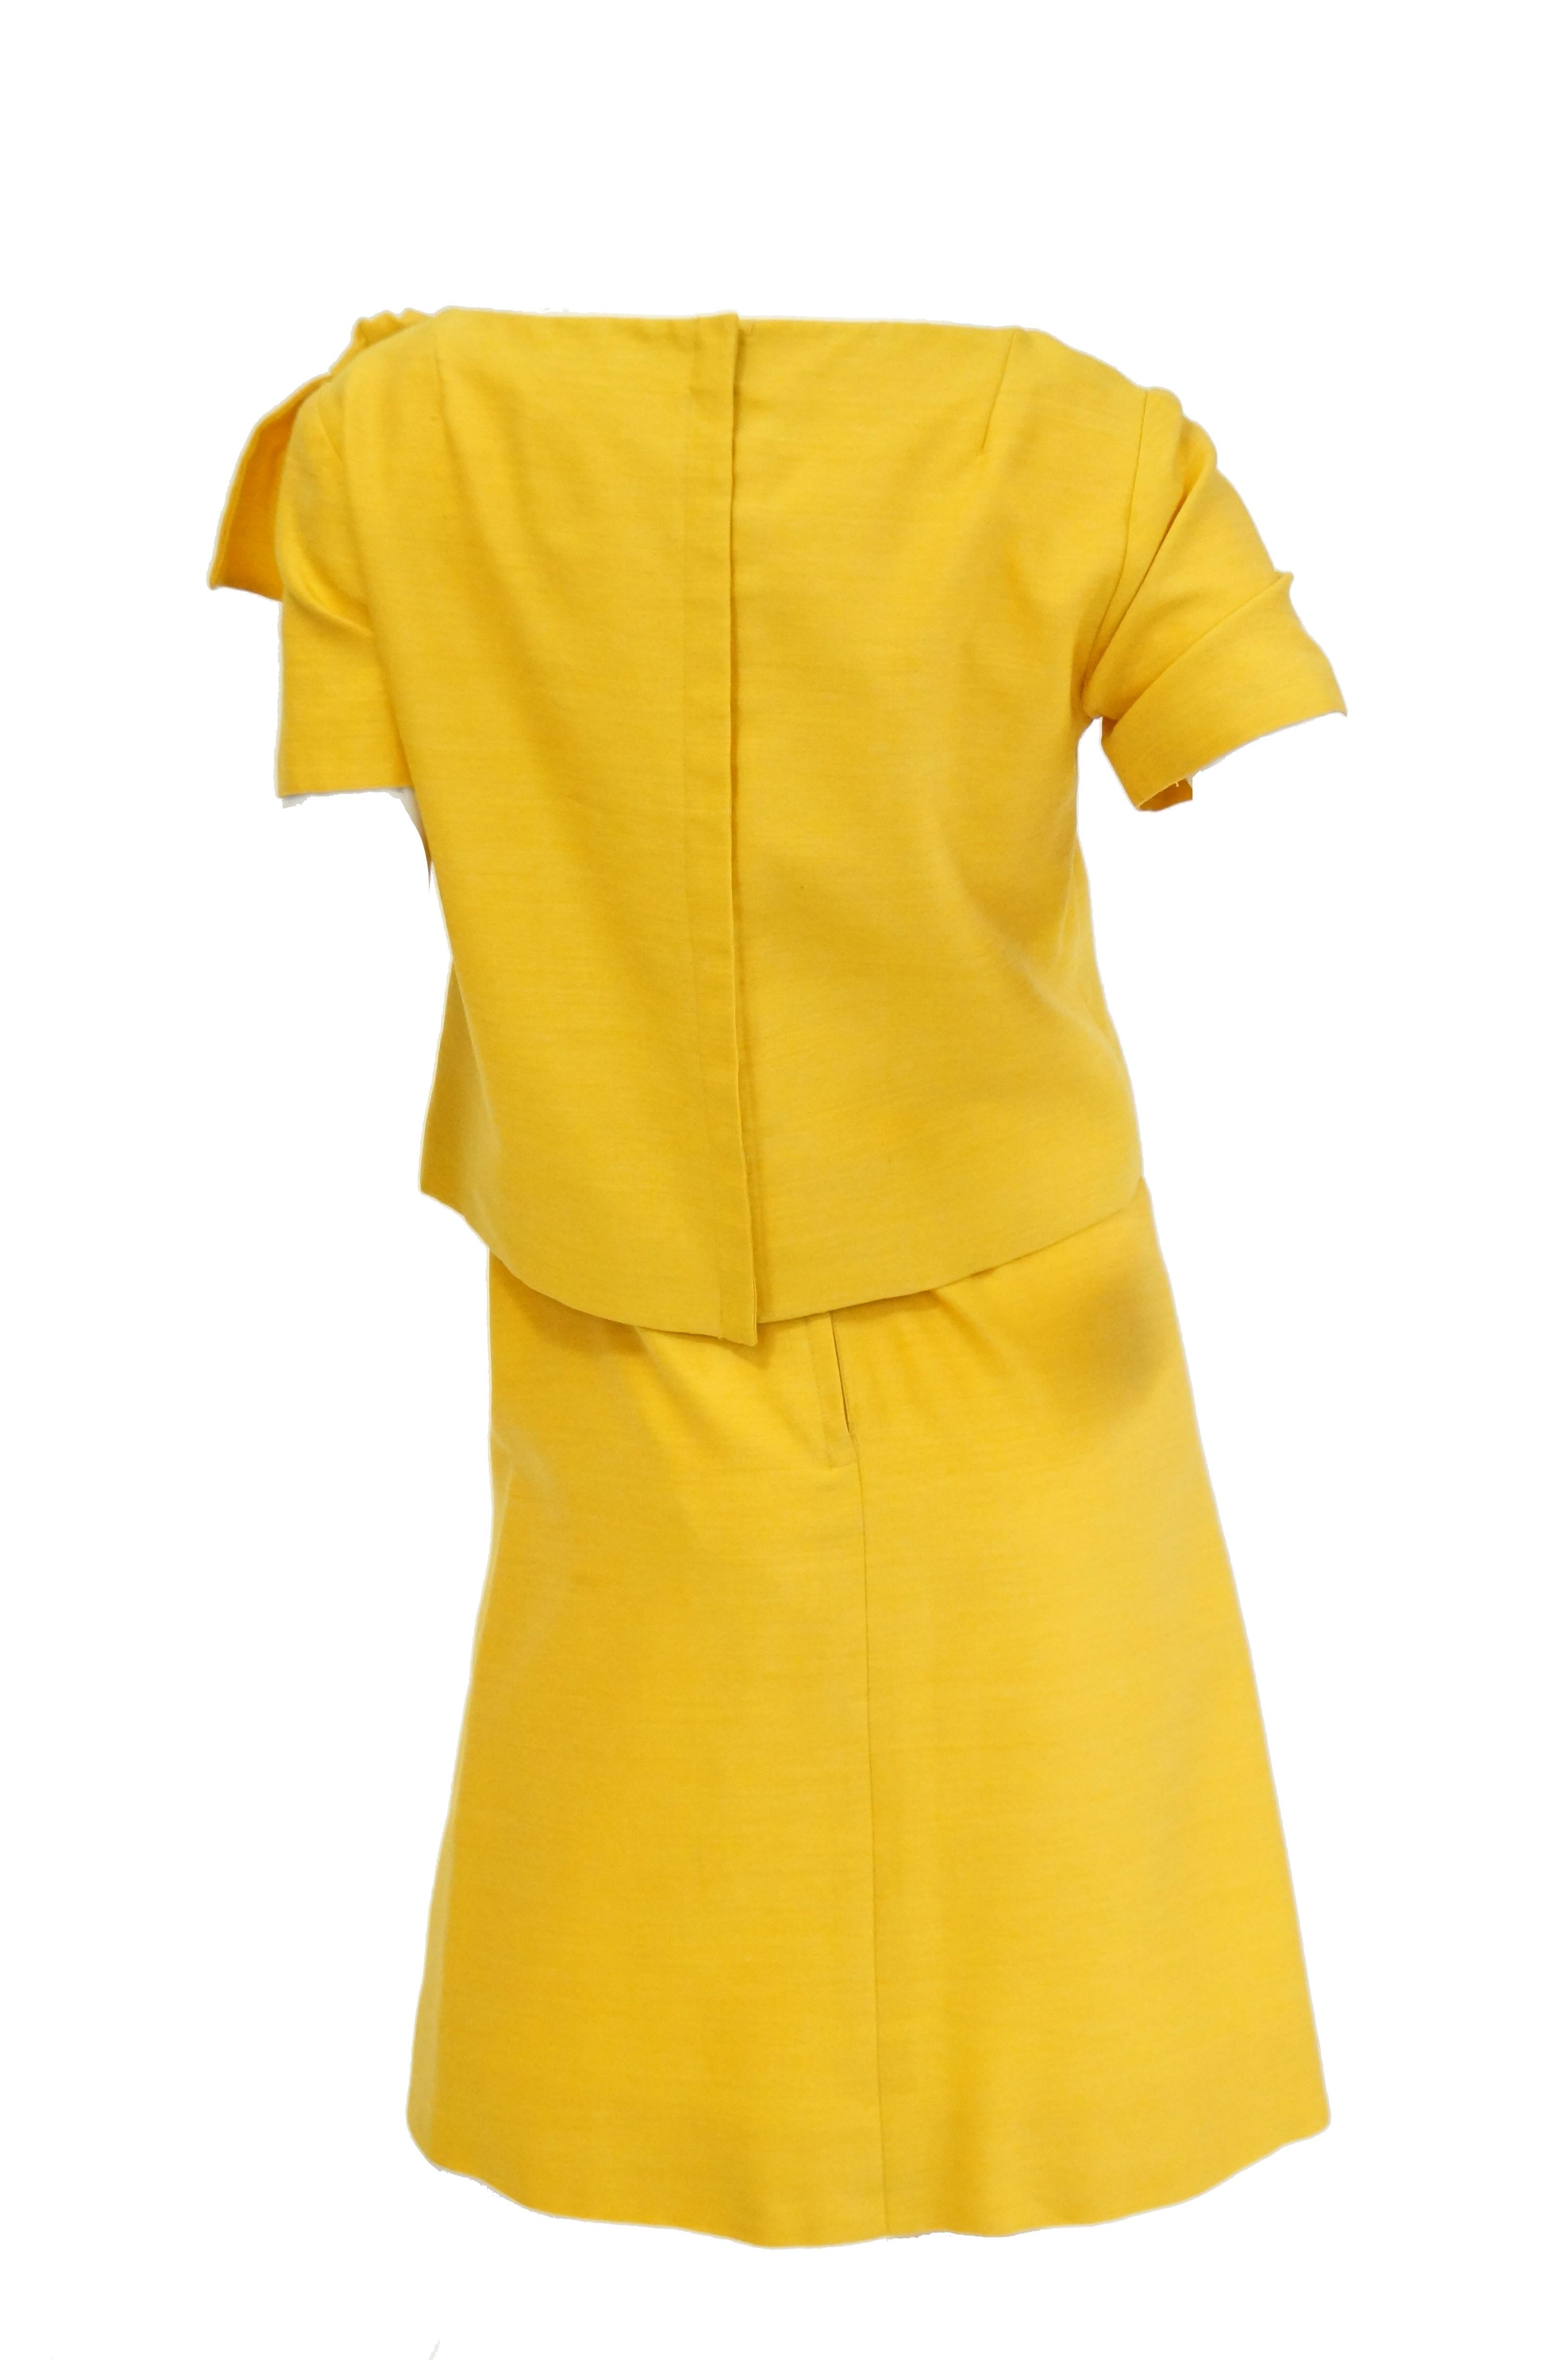  1960s Pierre Cardin Sunshine Yellow Wool Mod Dress In Excellent Condition For Sale In Houston, TX